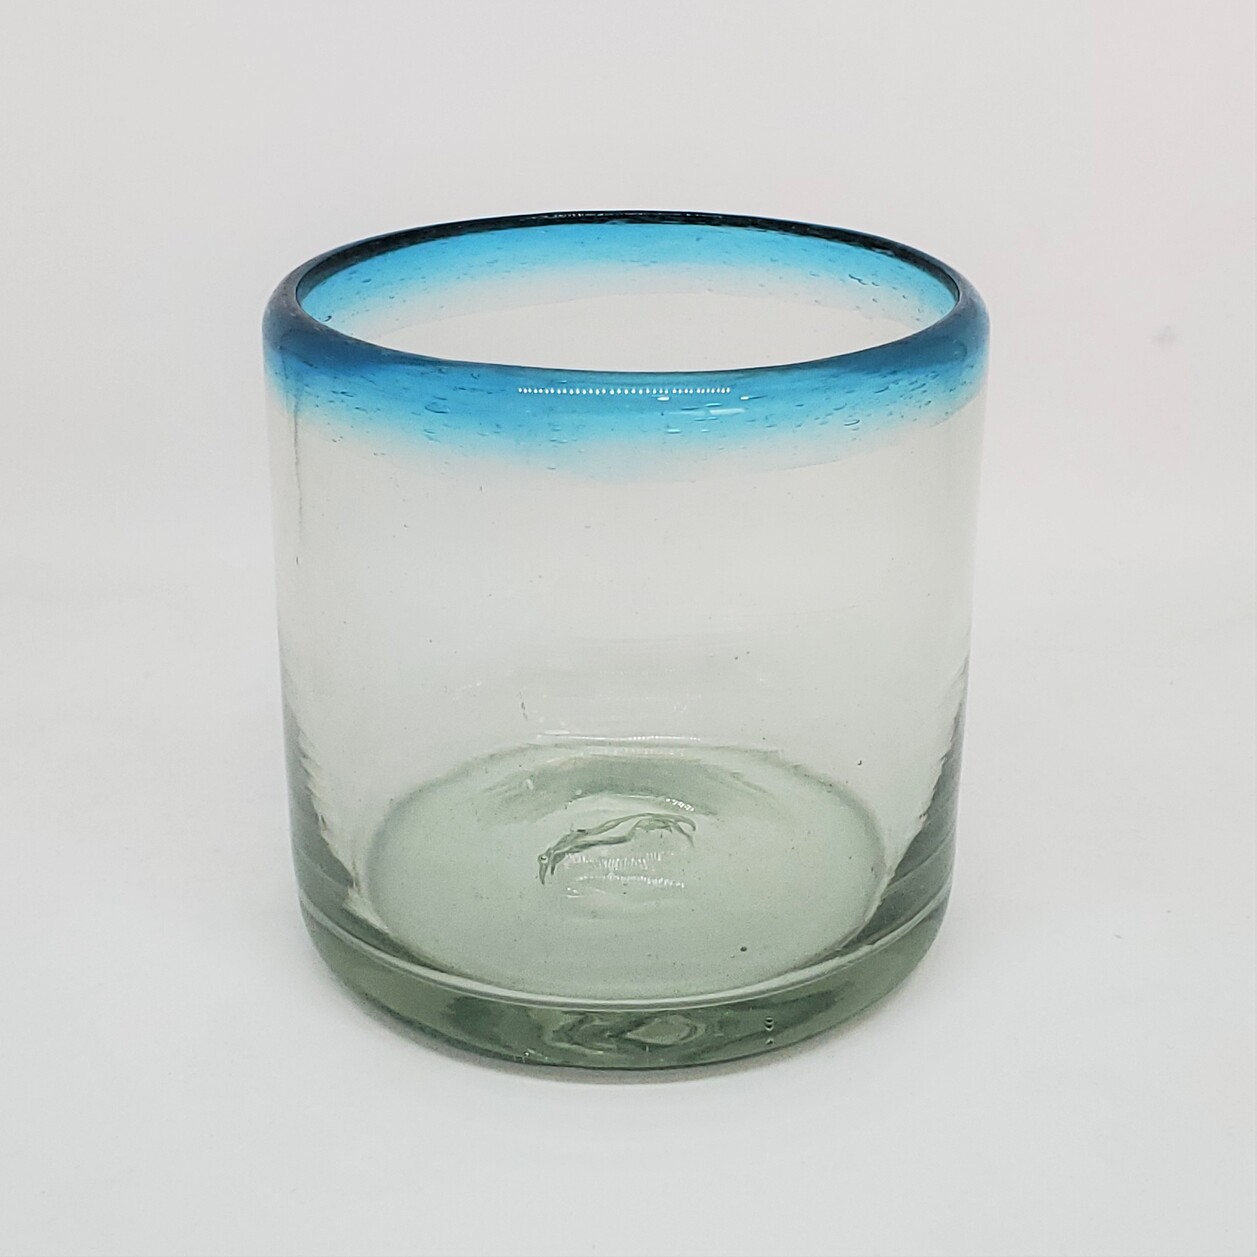 Sale Items / Aqua Blue Rim 8 oz DOF Rocks Glasses  / These glasses are just the right size to enjoy fresh squeezed fruit juice in the moning.